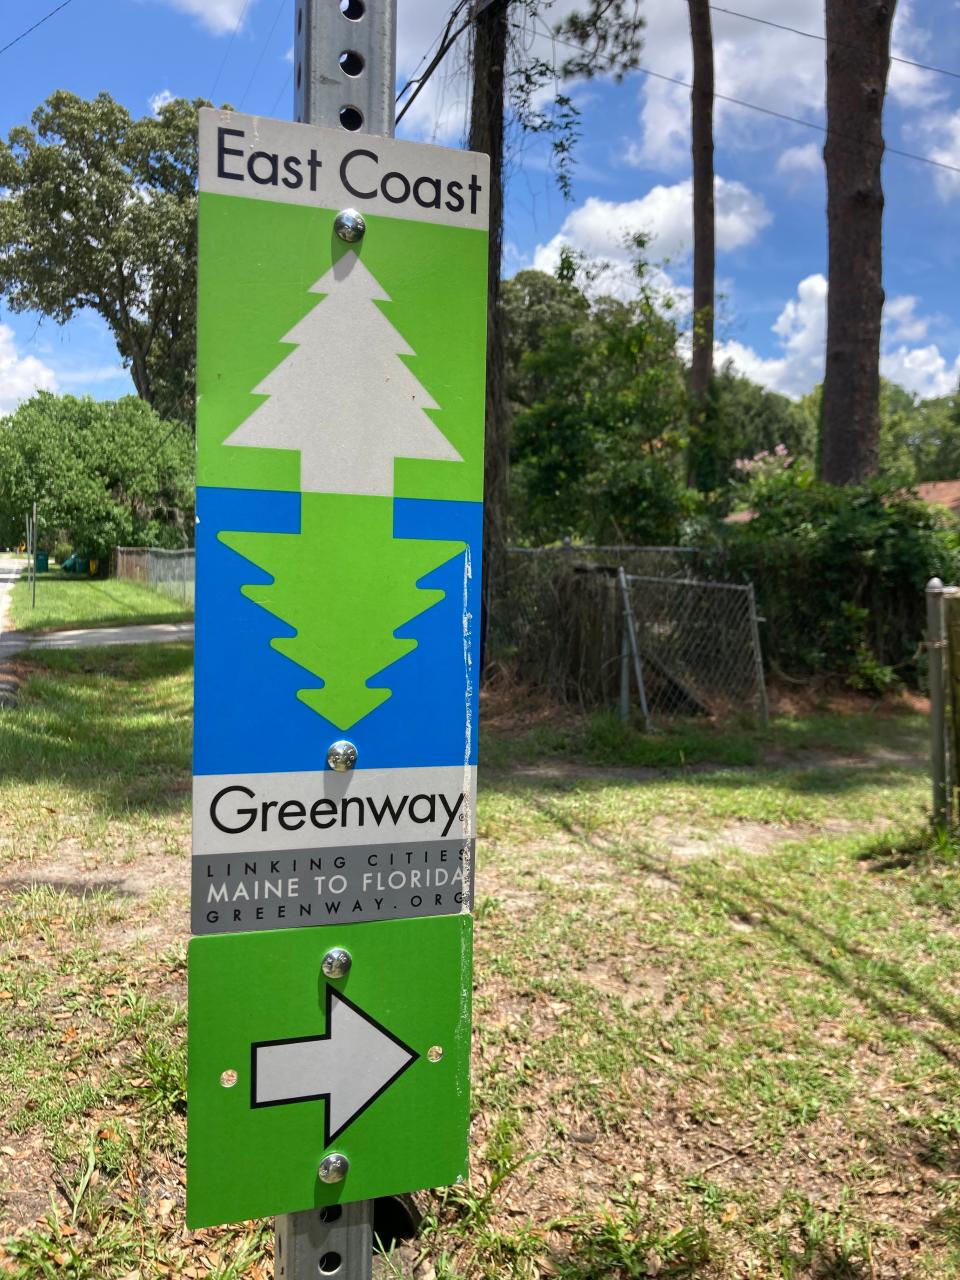 East Coast Greenway signage near Carrie E. Gould Elementary School.